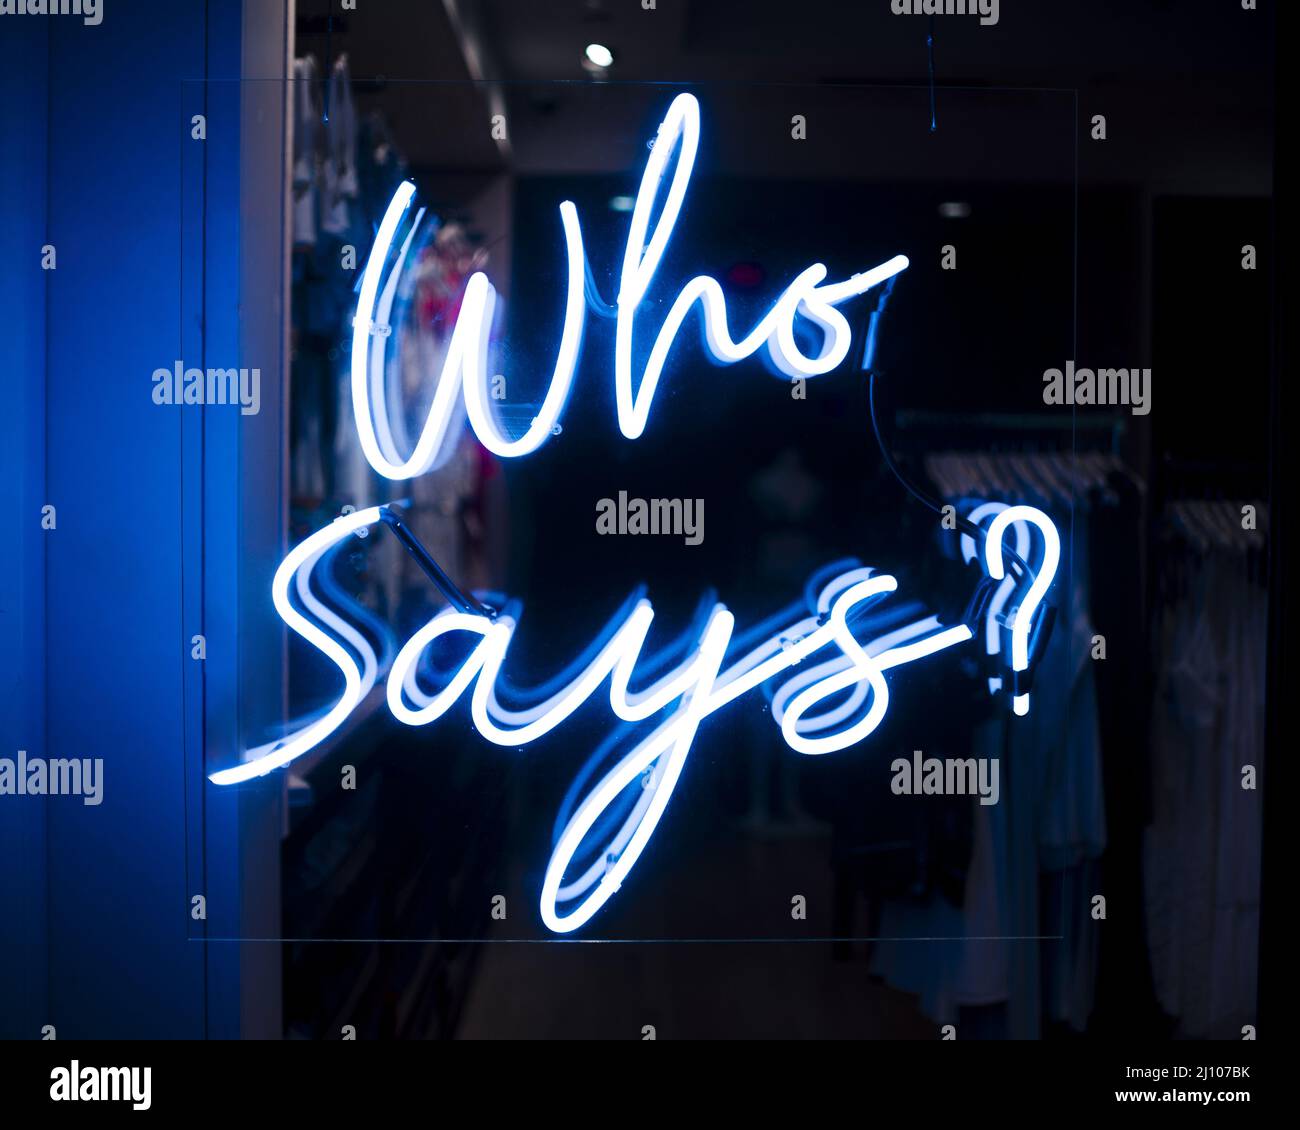 Who says quote sign neon lights Stock Photo